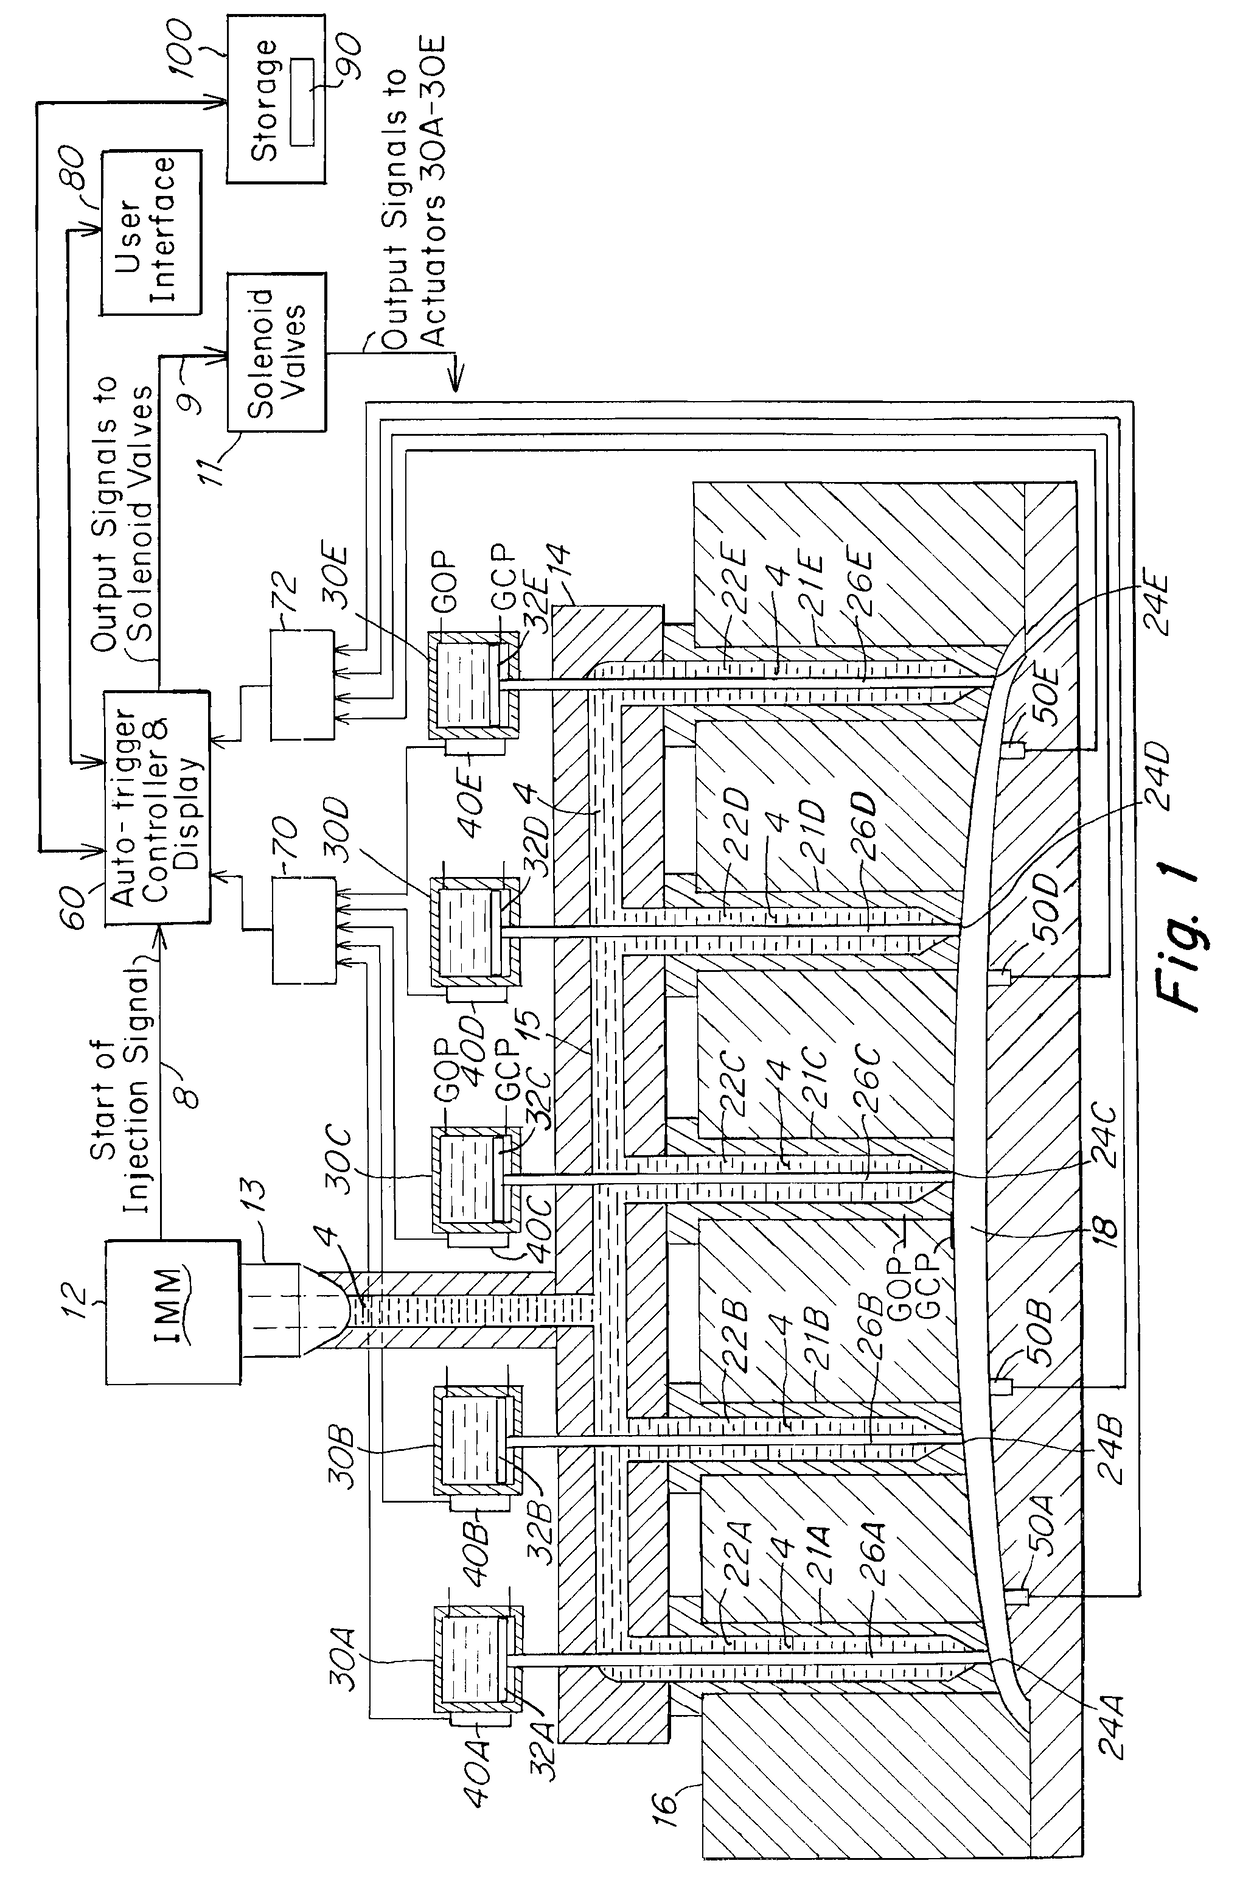 Injection molding apparatus and method for automatic cycle to cycle cavity injection